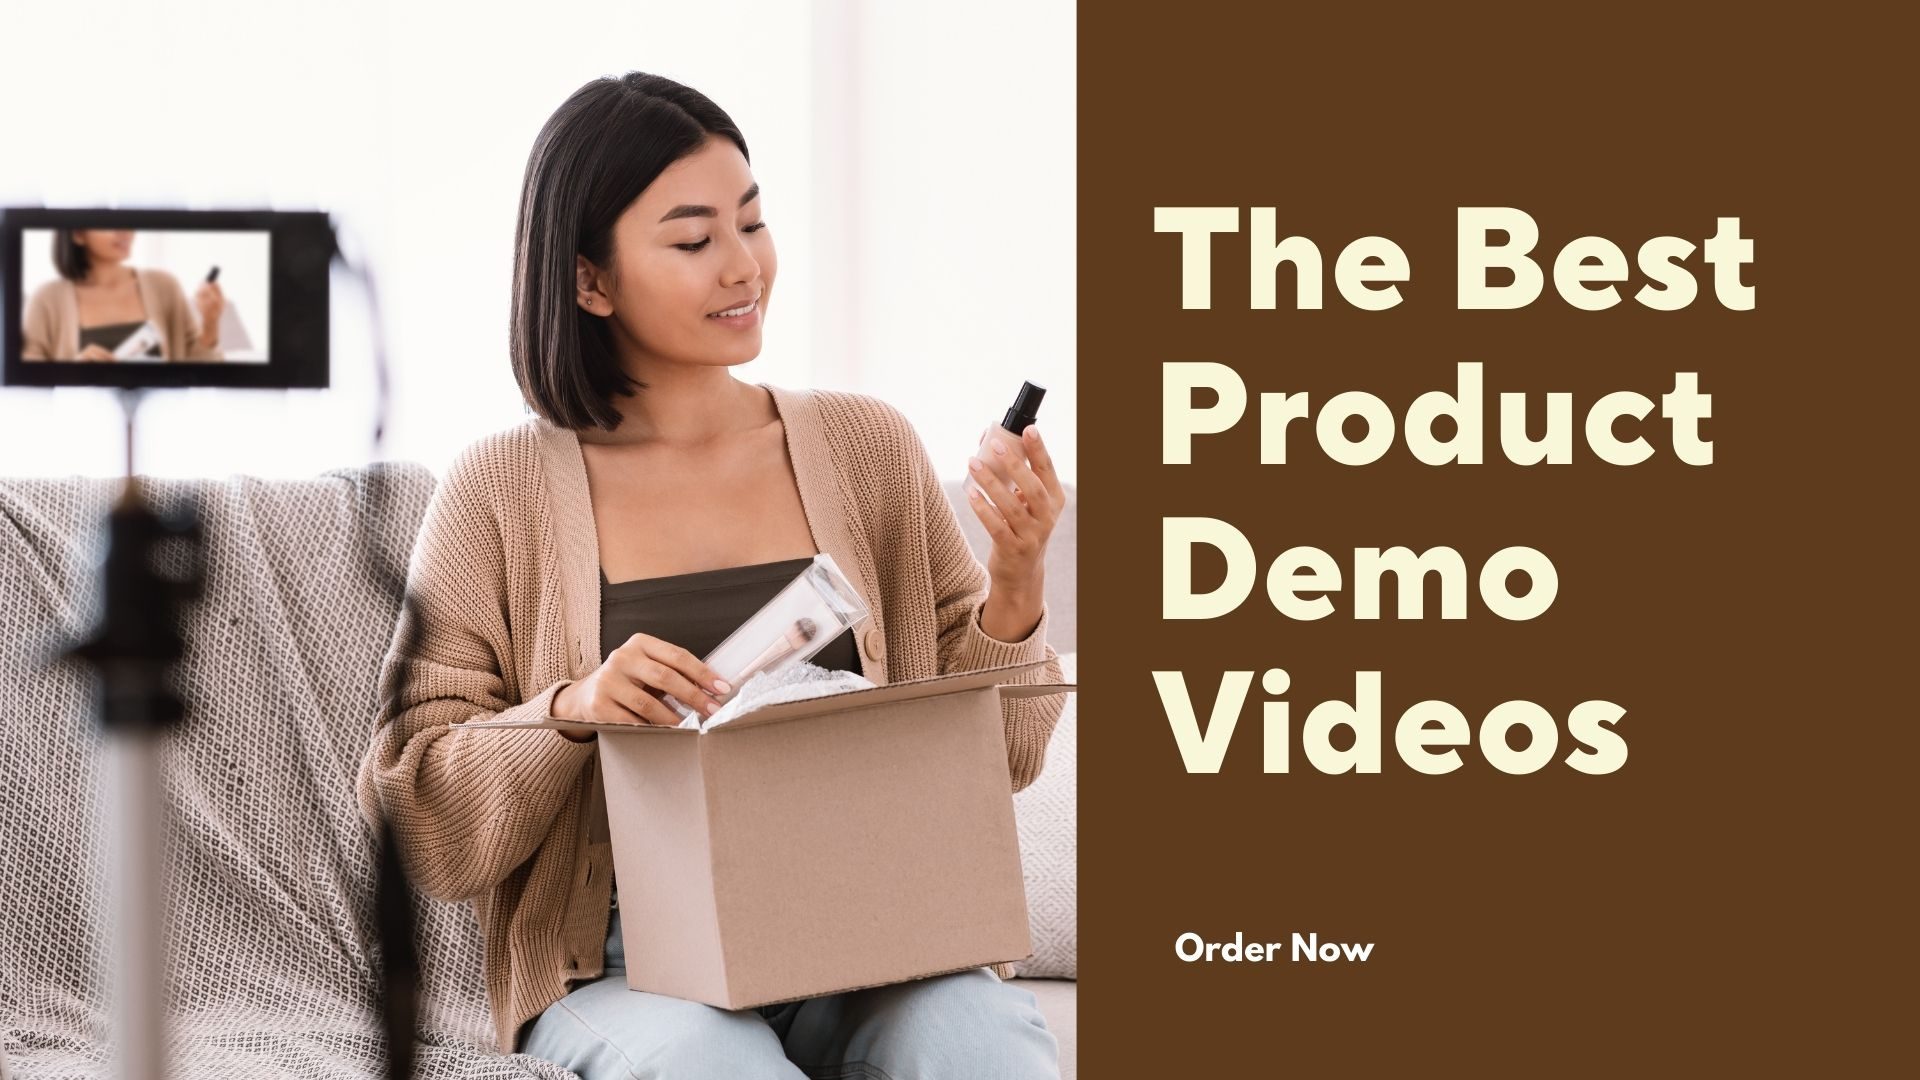 Product Demo Videos